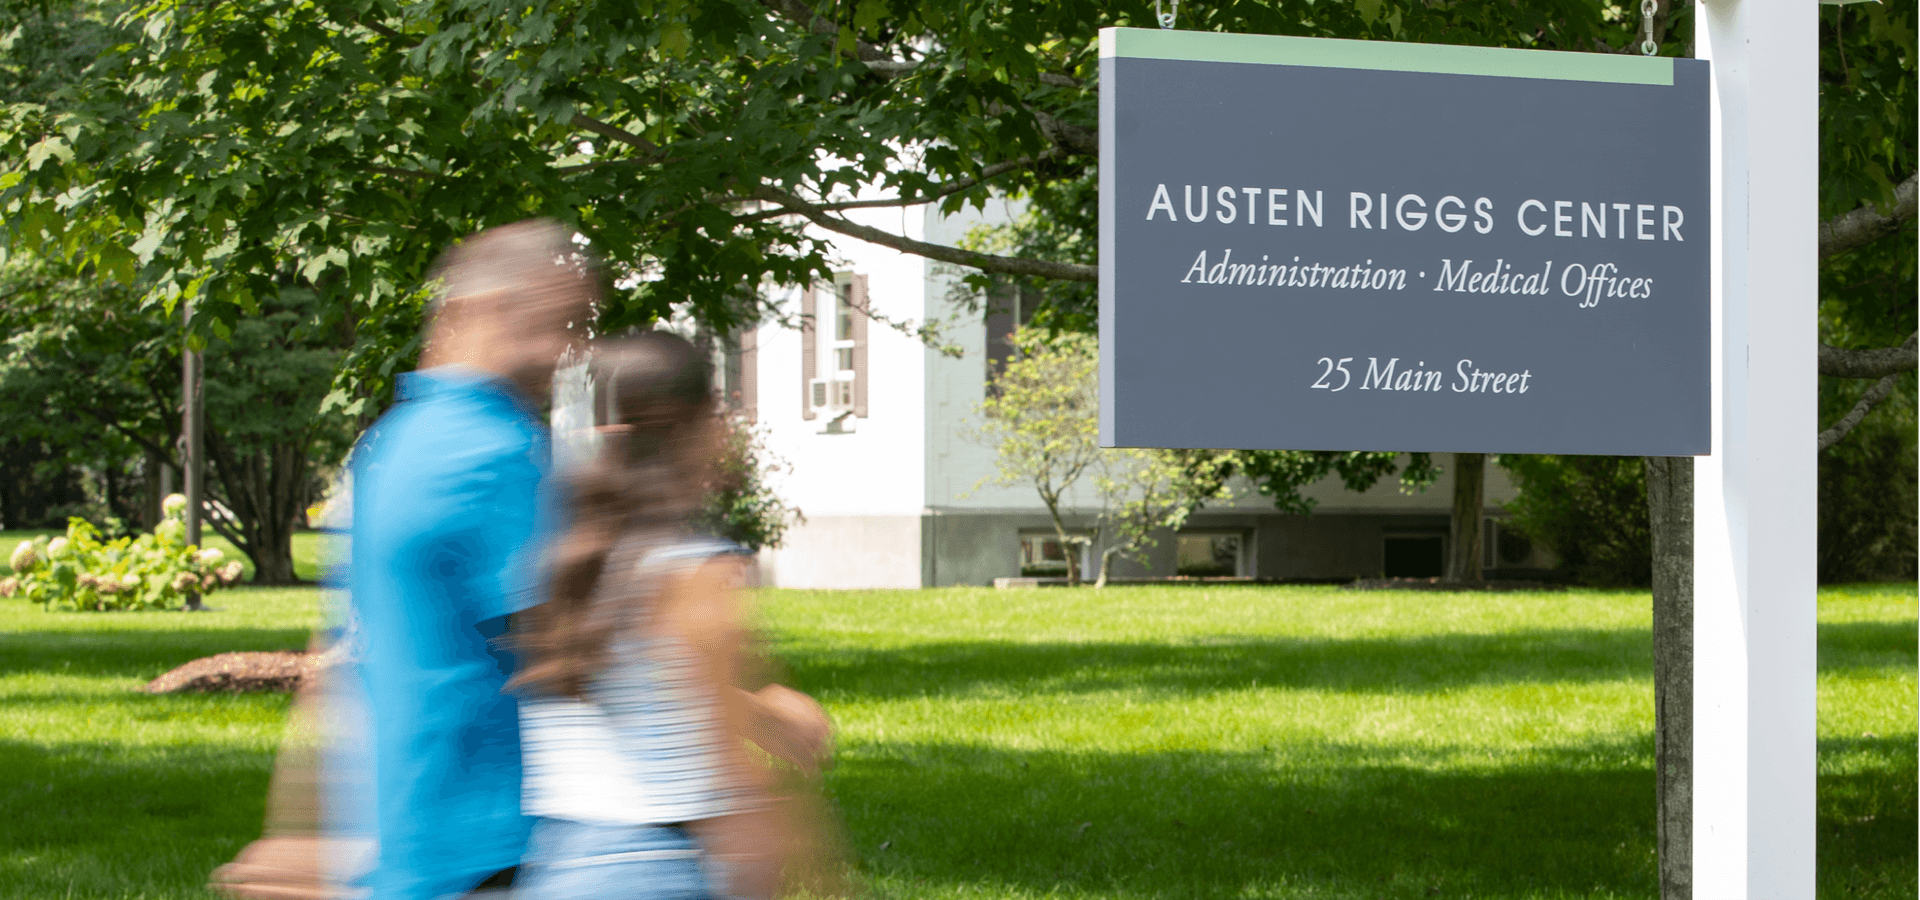 Sign for Austen Riggs Center administration and medical offices at 25 Main Street in Stockbridge, Massachusetts